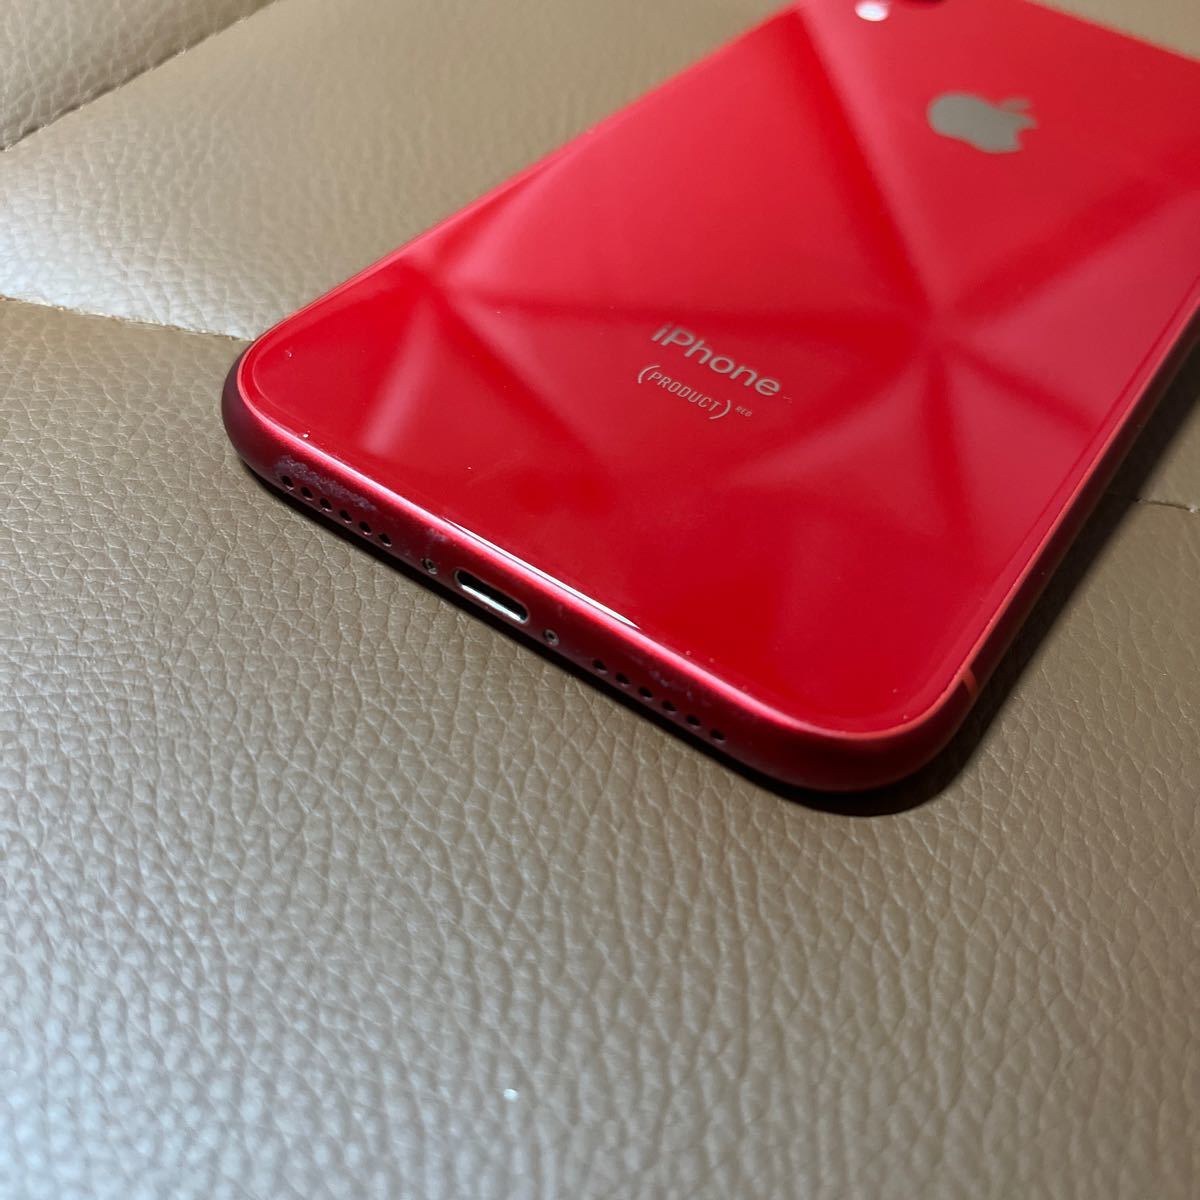 iPhone XR PRODUCT RED 64GB - rehda.com